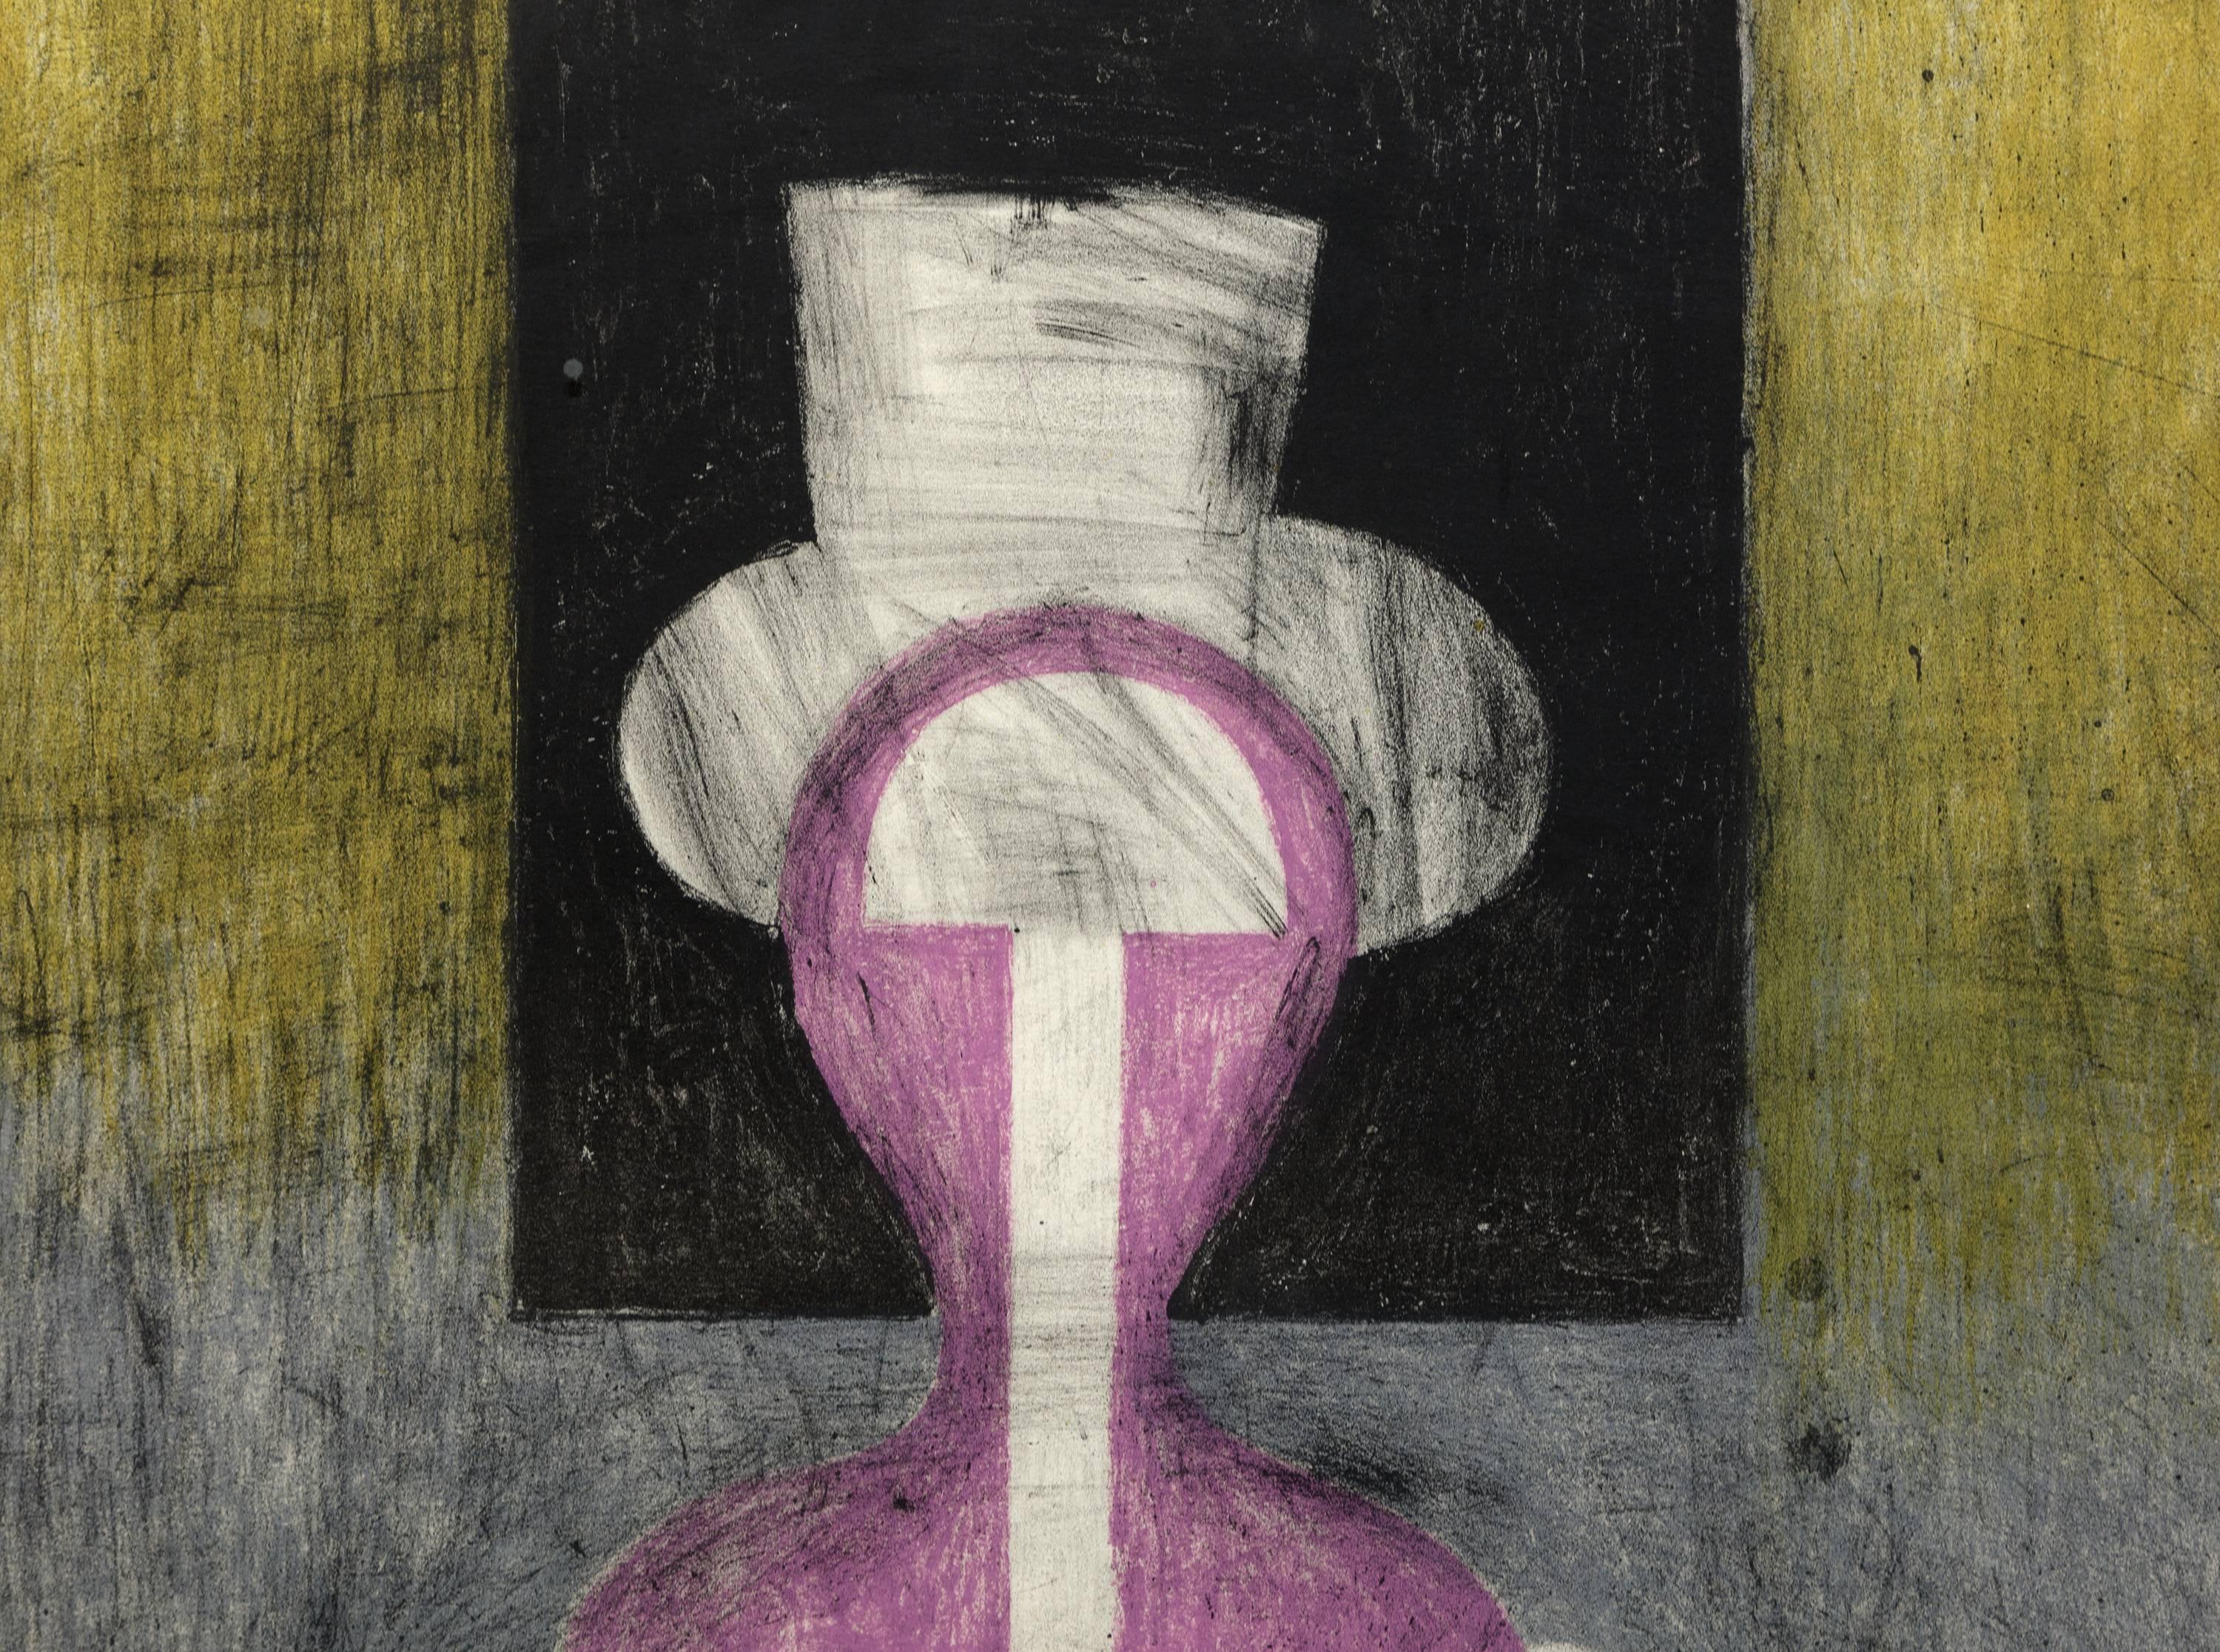 An abstract figurative lithograph executed in violet, yellow green, black, gray and white by Latin American artist Rufino Tamayo depicting a woman wearing a sombrero.
Signed lower middle, 